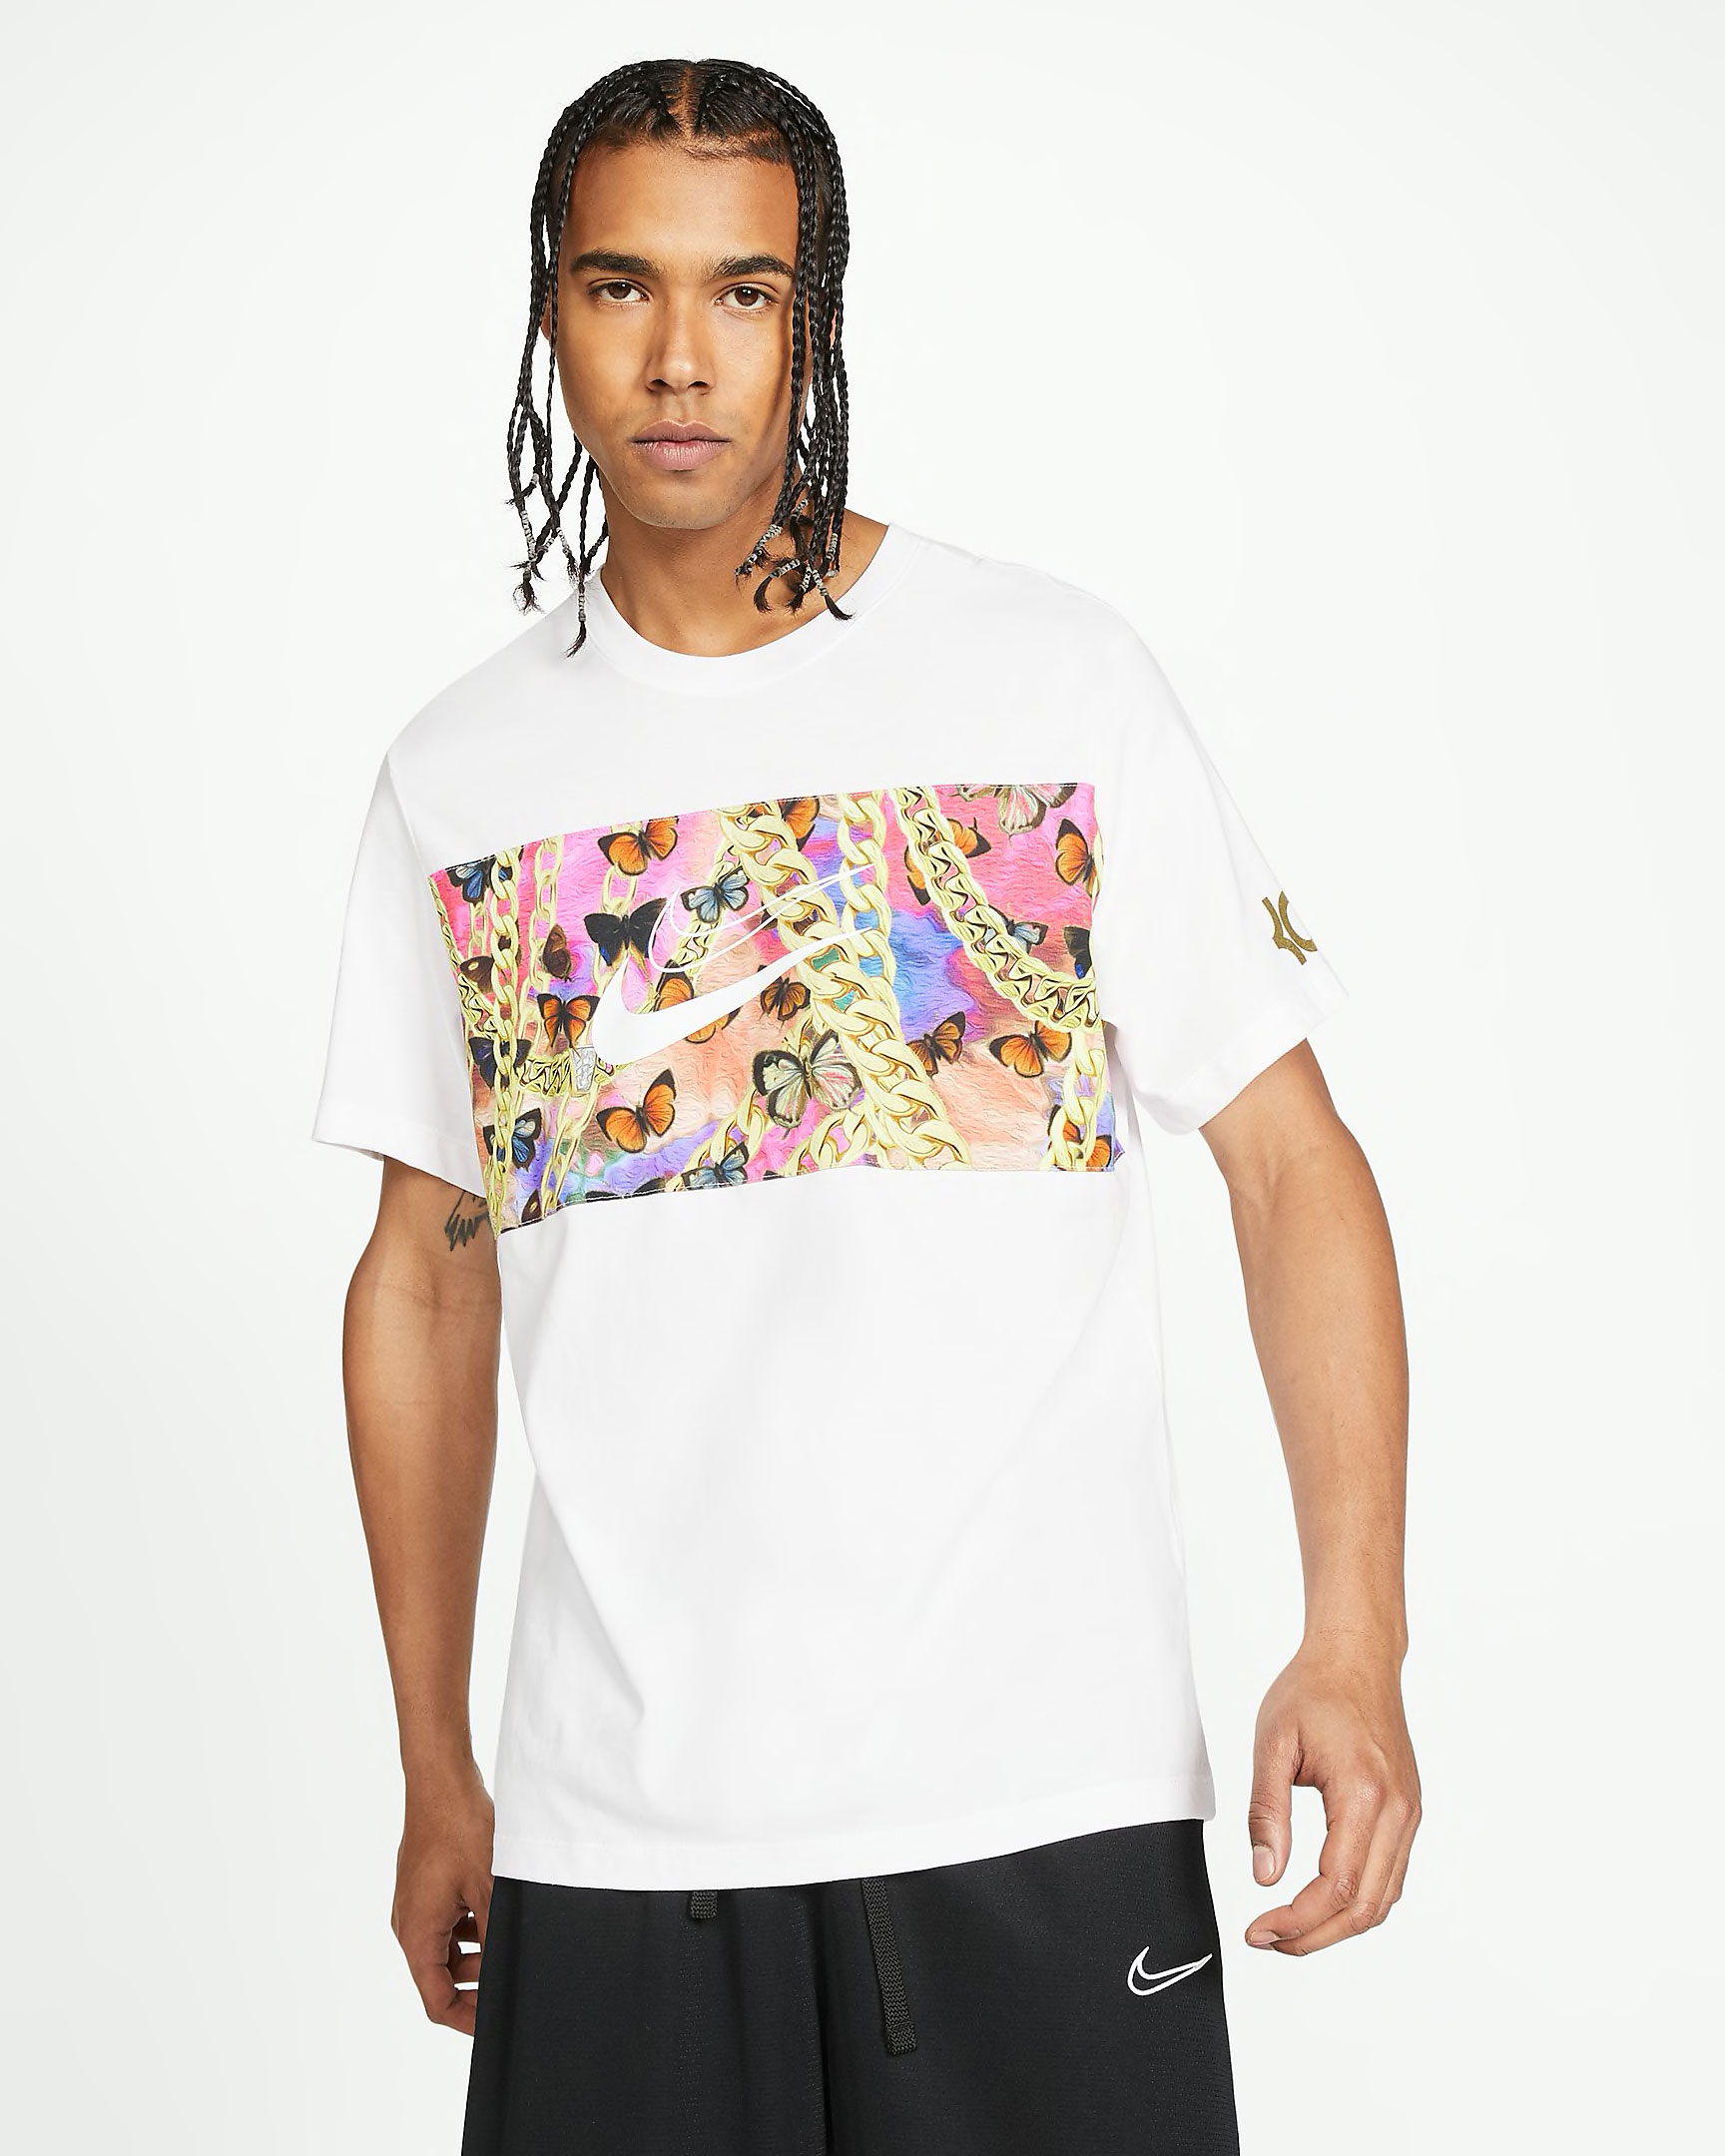 nike-kd-13-hype-butterflies-and-chains-shirt-2